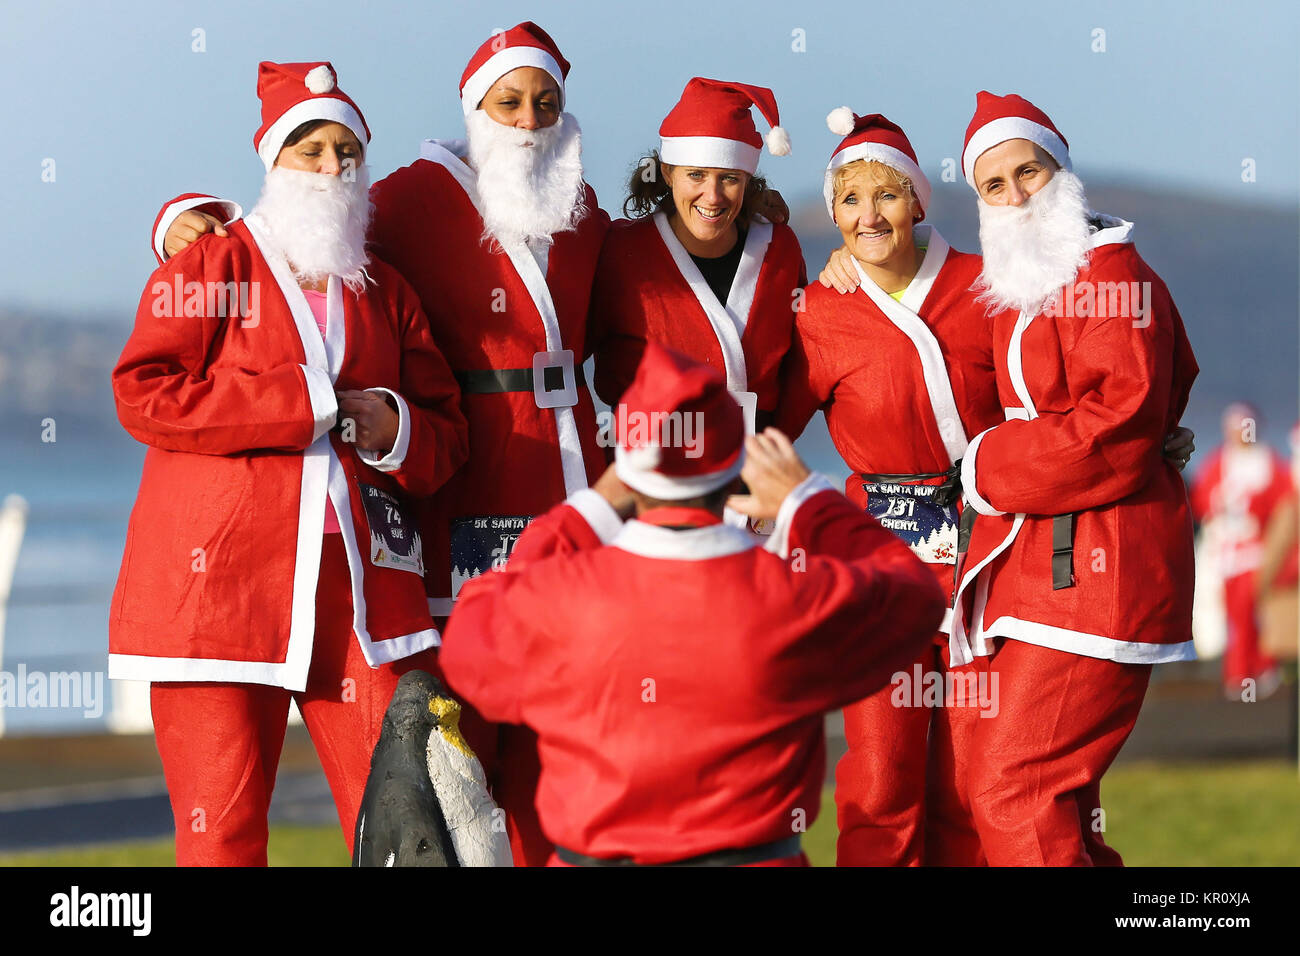 Pictured: Runners in Santa Claus fancy dress have their picture taken in this year's run in Aberavon, Wales, UK. Saturday 16 December 2017 Re: 500 peo Stock Photo